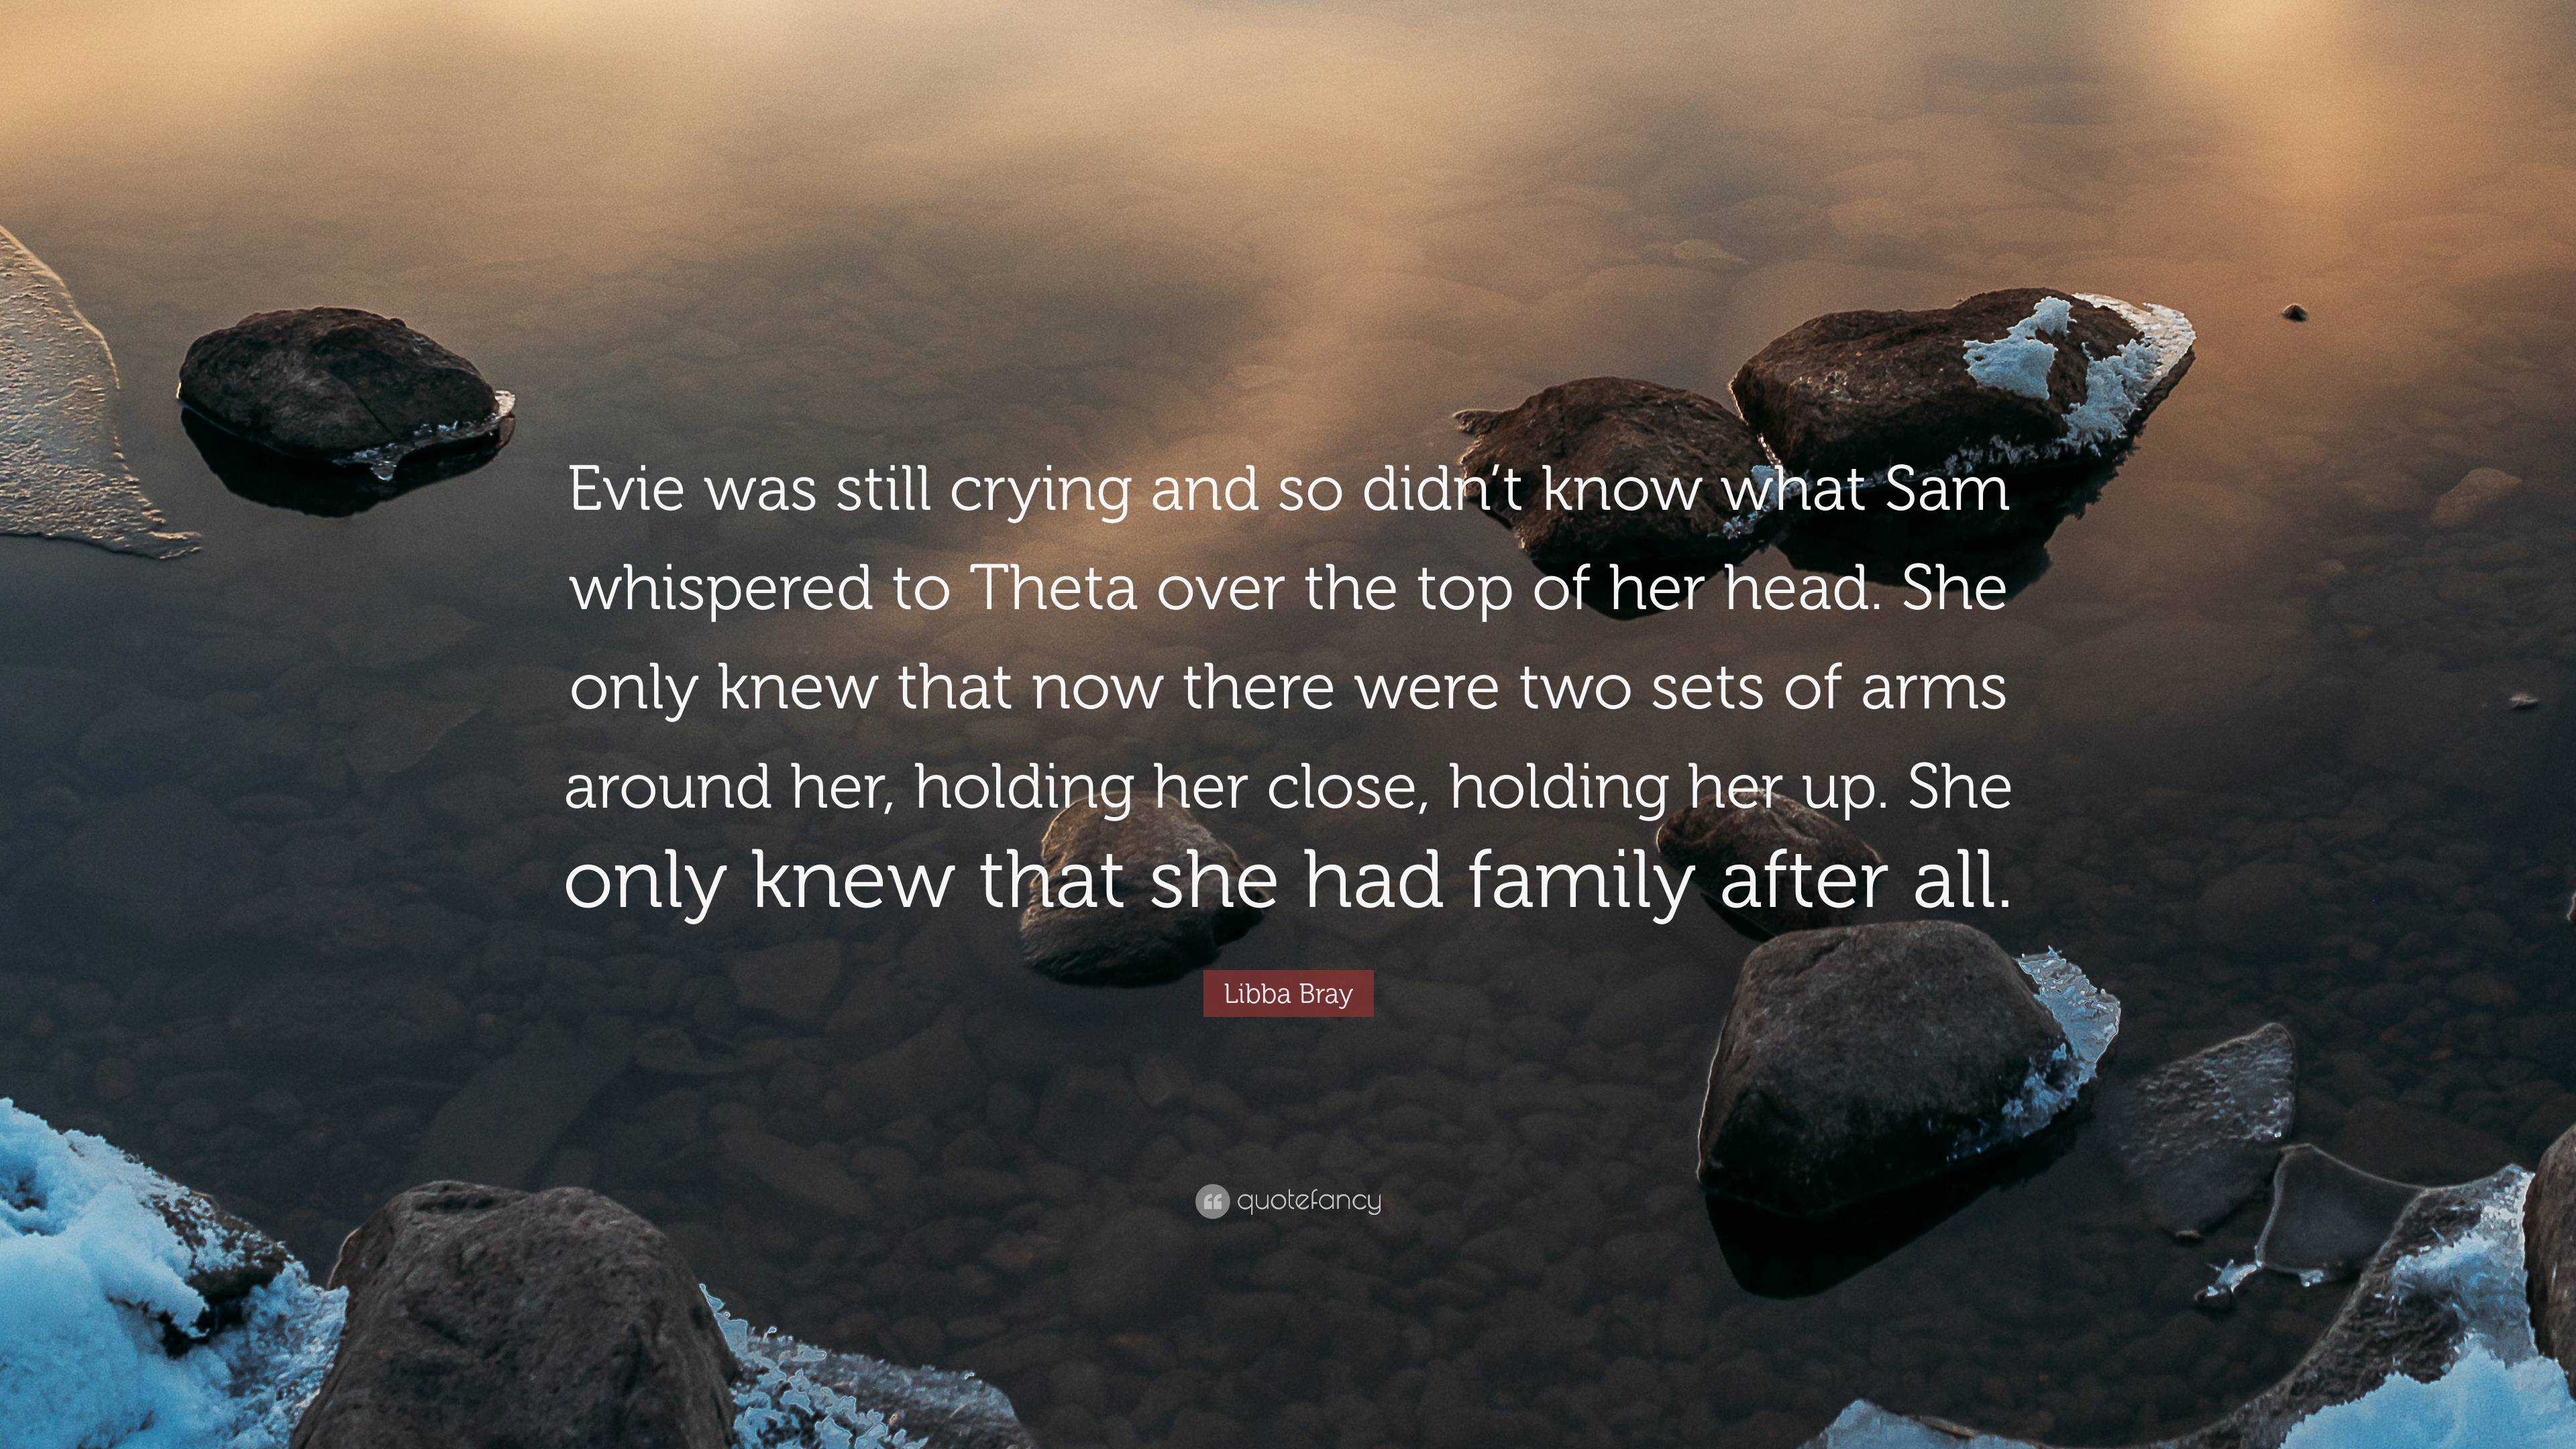 Libba Bray Quote: “Evie was still crying and so didn’t know what Sam ...